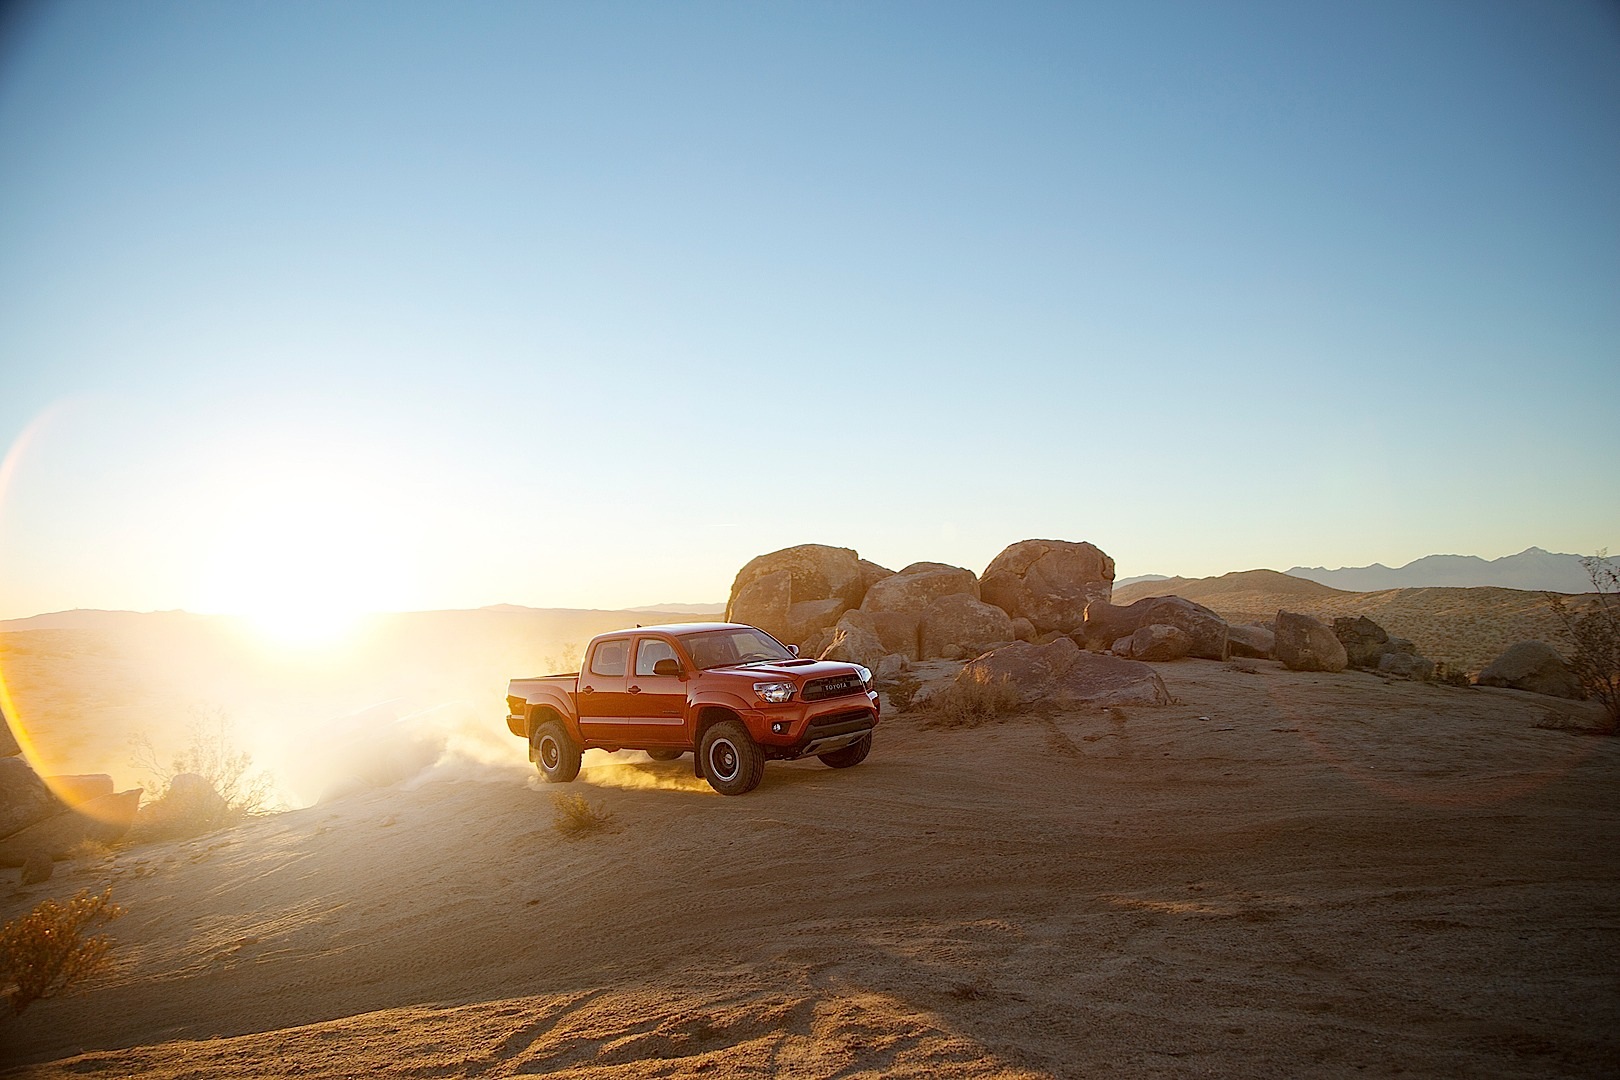 Get Your Toyota Trd Pro HD Wallpaper Here Photo Gallery